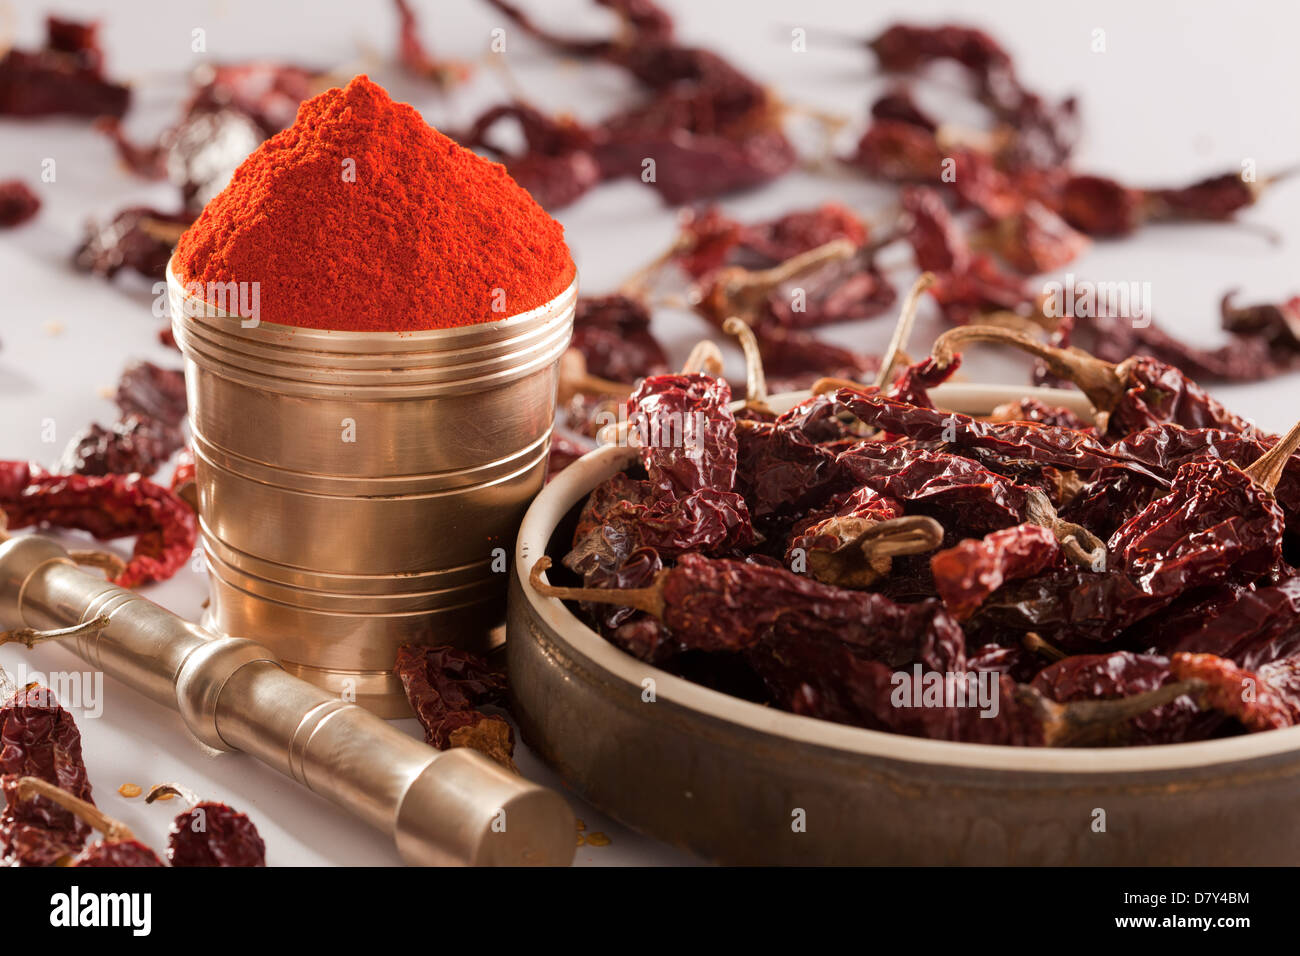 Red Chilly-Pulver. Stockfoto